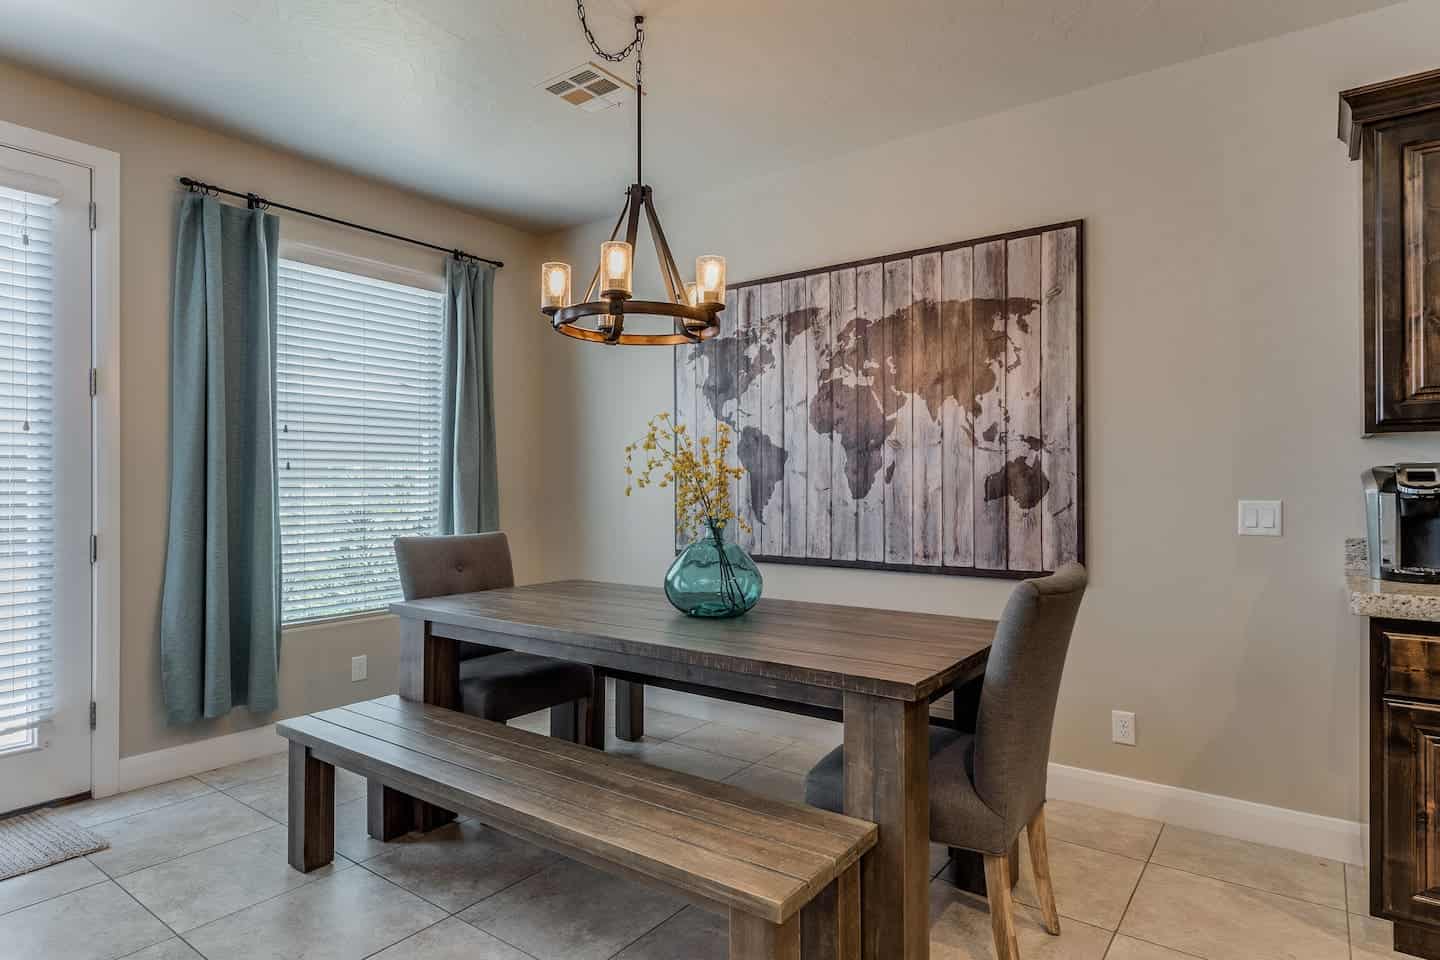 Image of Airbnb rental in Mesquite, Nevada